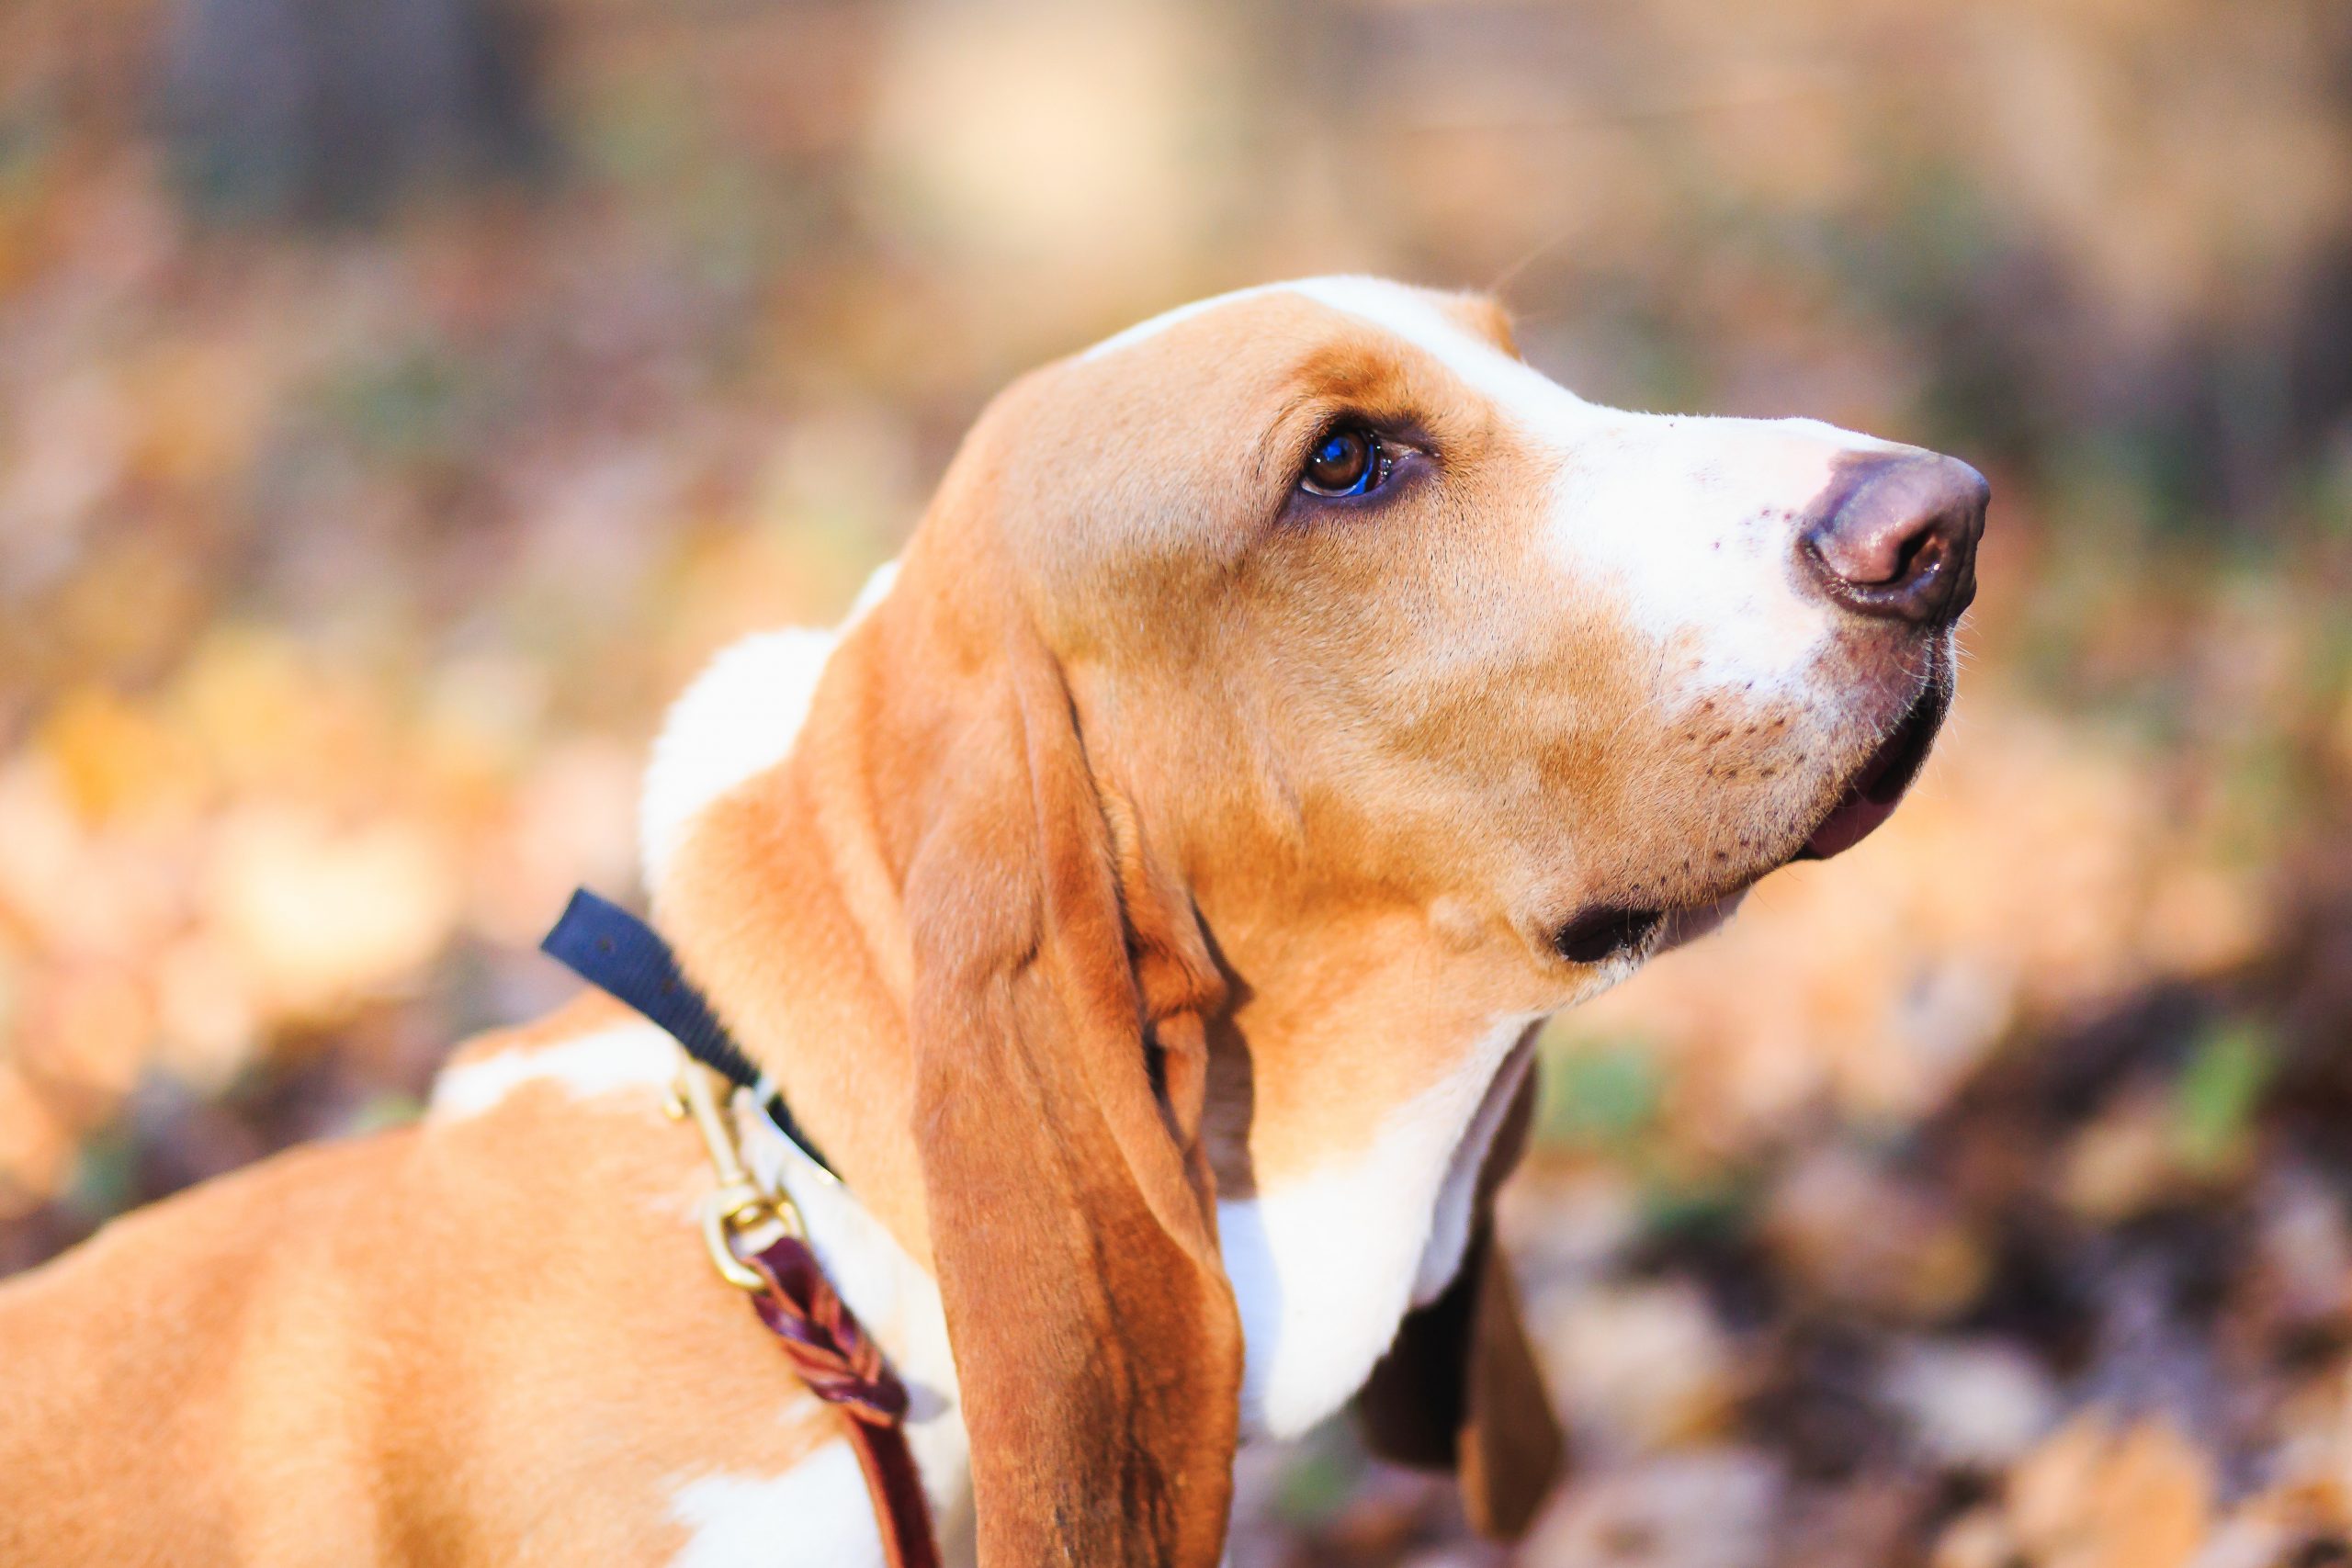 A brown and white dog with long ears and a collar looks upwards with a background of autumn leaves.